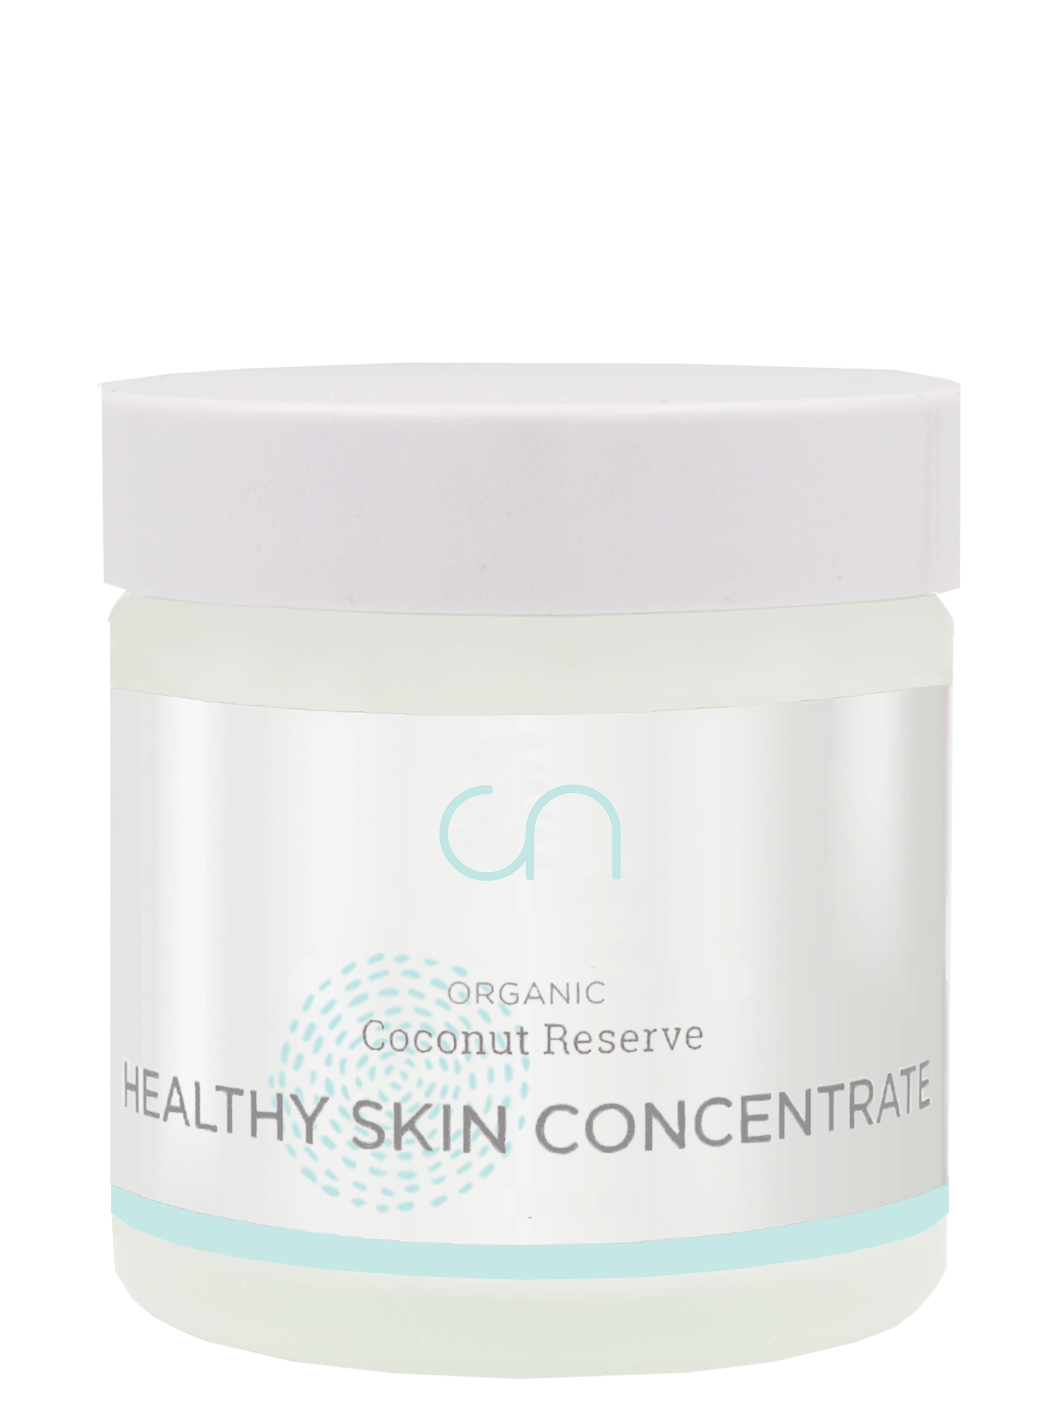 cn innovations e.U. Produkt-Beispiele Organic Coconut Reserve Healthy Skin Concentrate